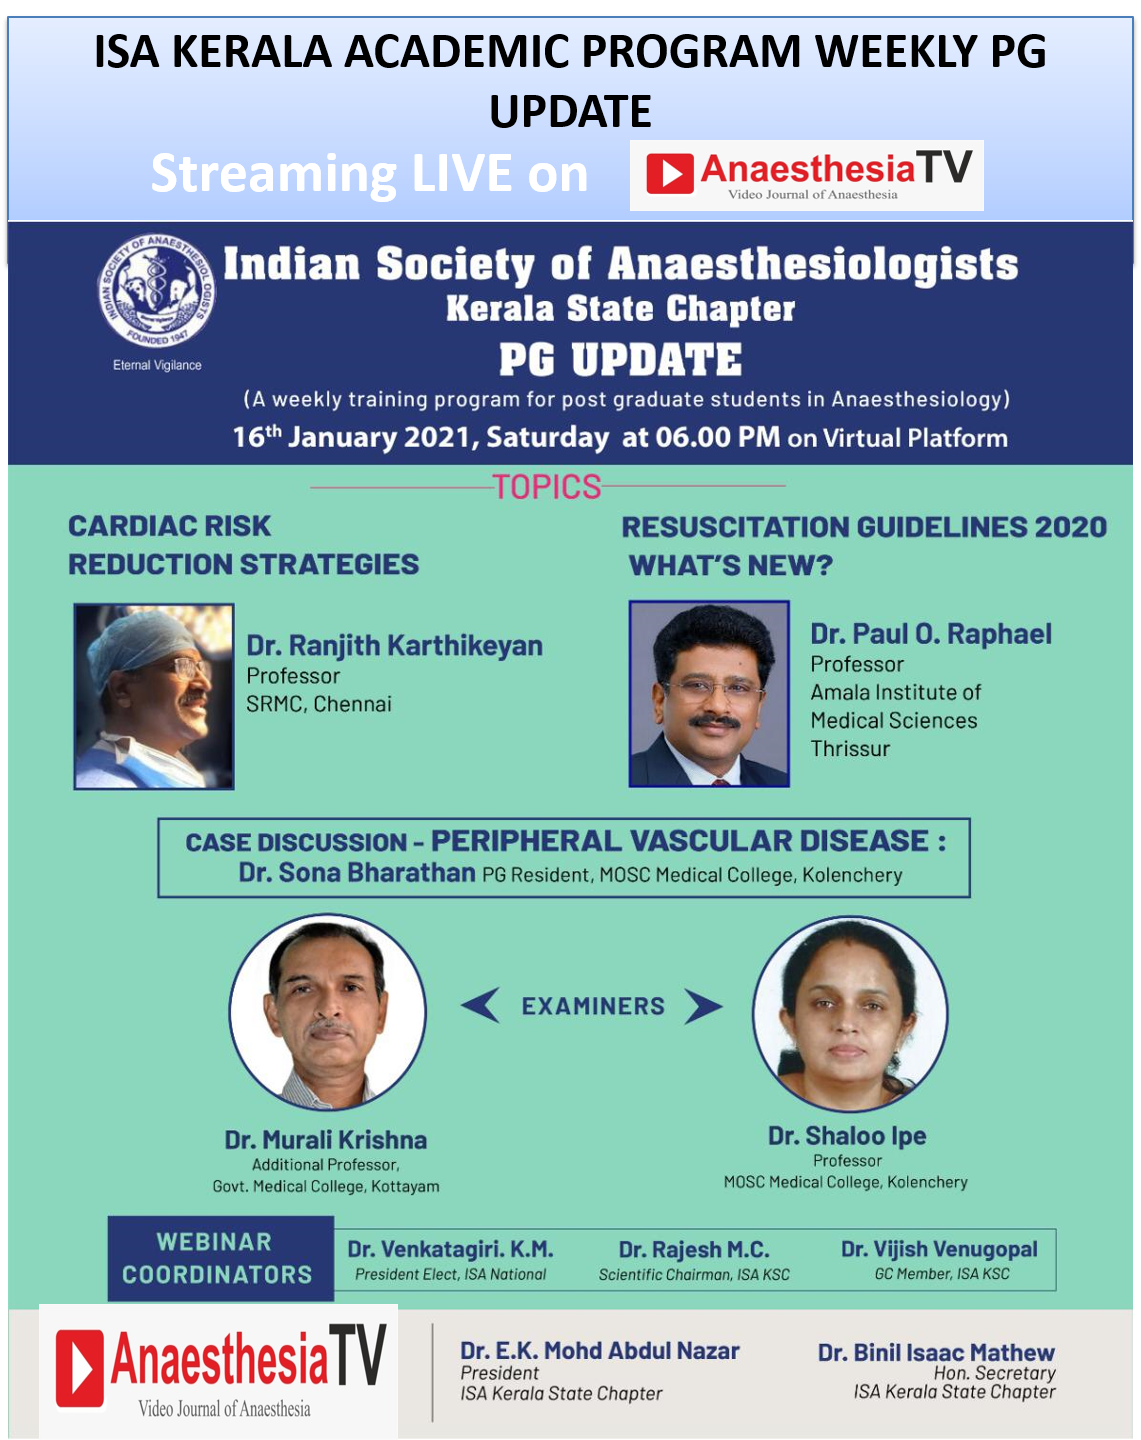 Indian Society of Anaesthesiologists ( ISA ) , Kerala State Chapter PG UPDATE on 16th January 2021, Saturday at 6.00 pm IST